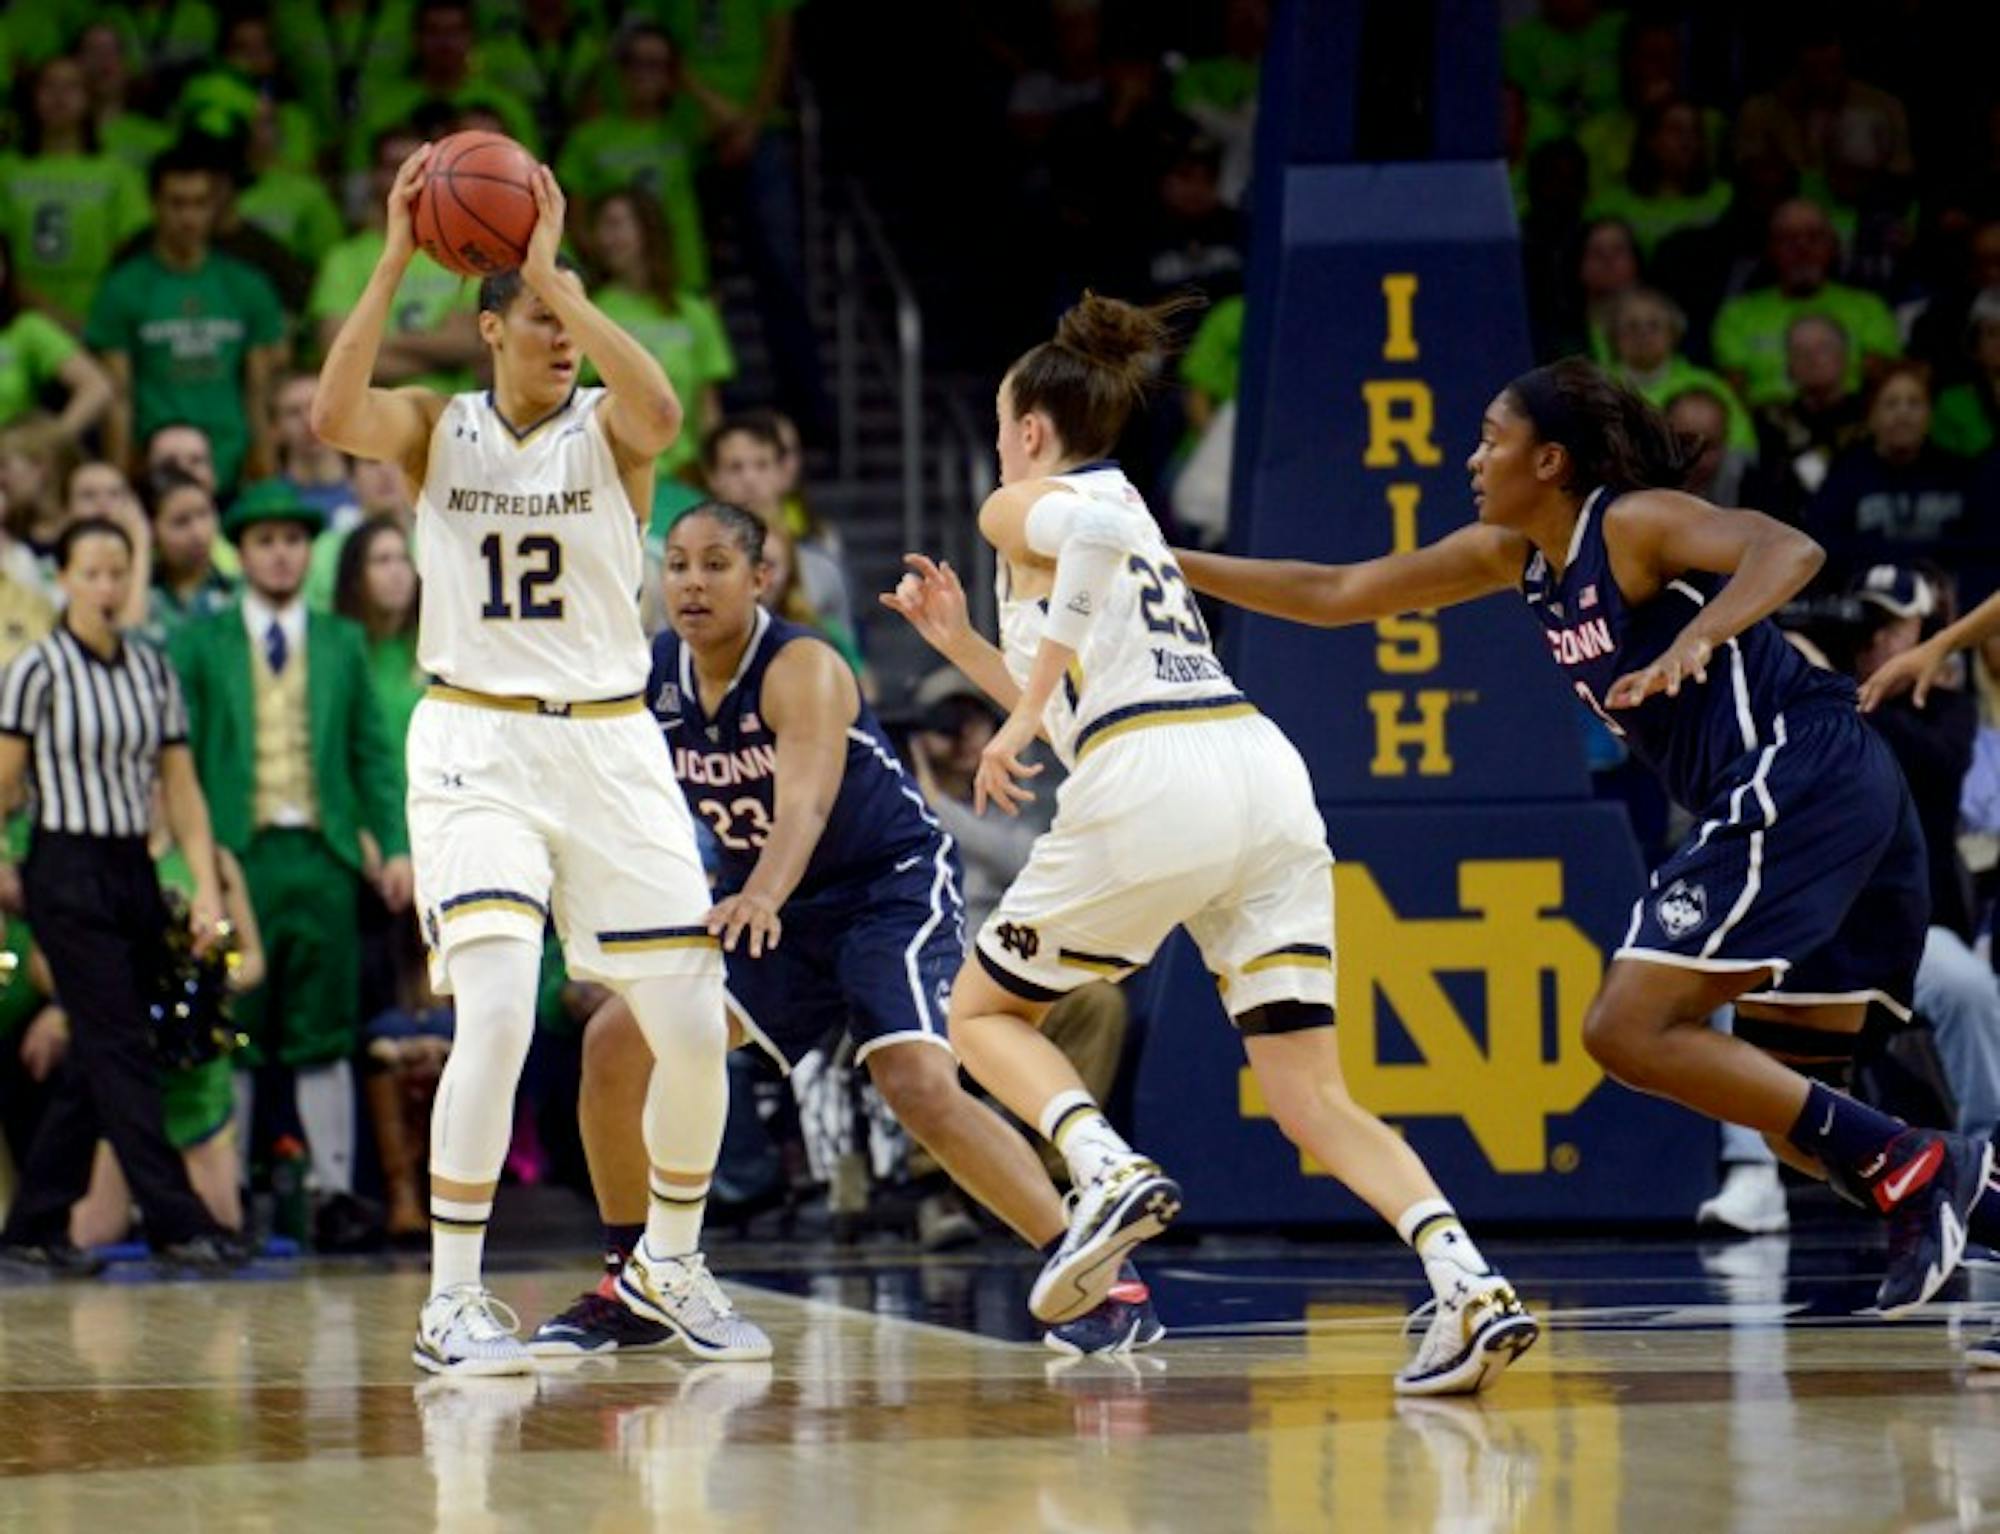 Irish sophomore forward Taya Reimer sets up to pass during Notre Dame’s 76-58 loss against Connecticut on Dec. 6 at Purcell Pavilion.